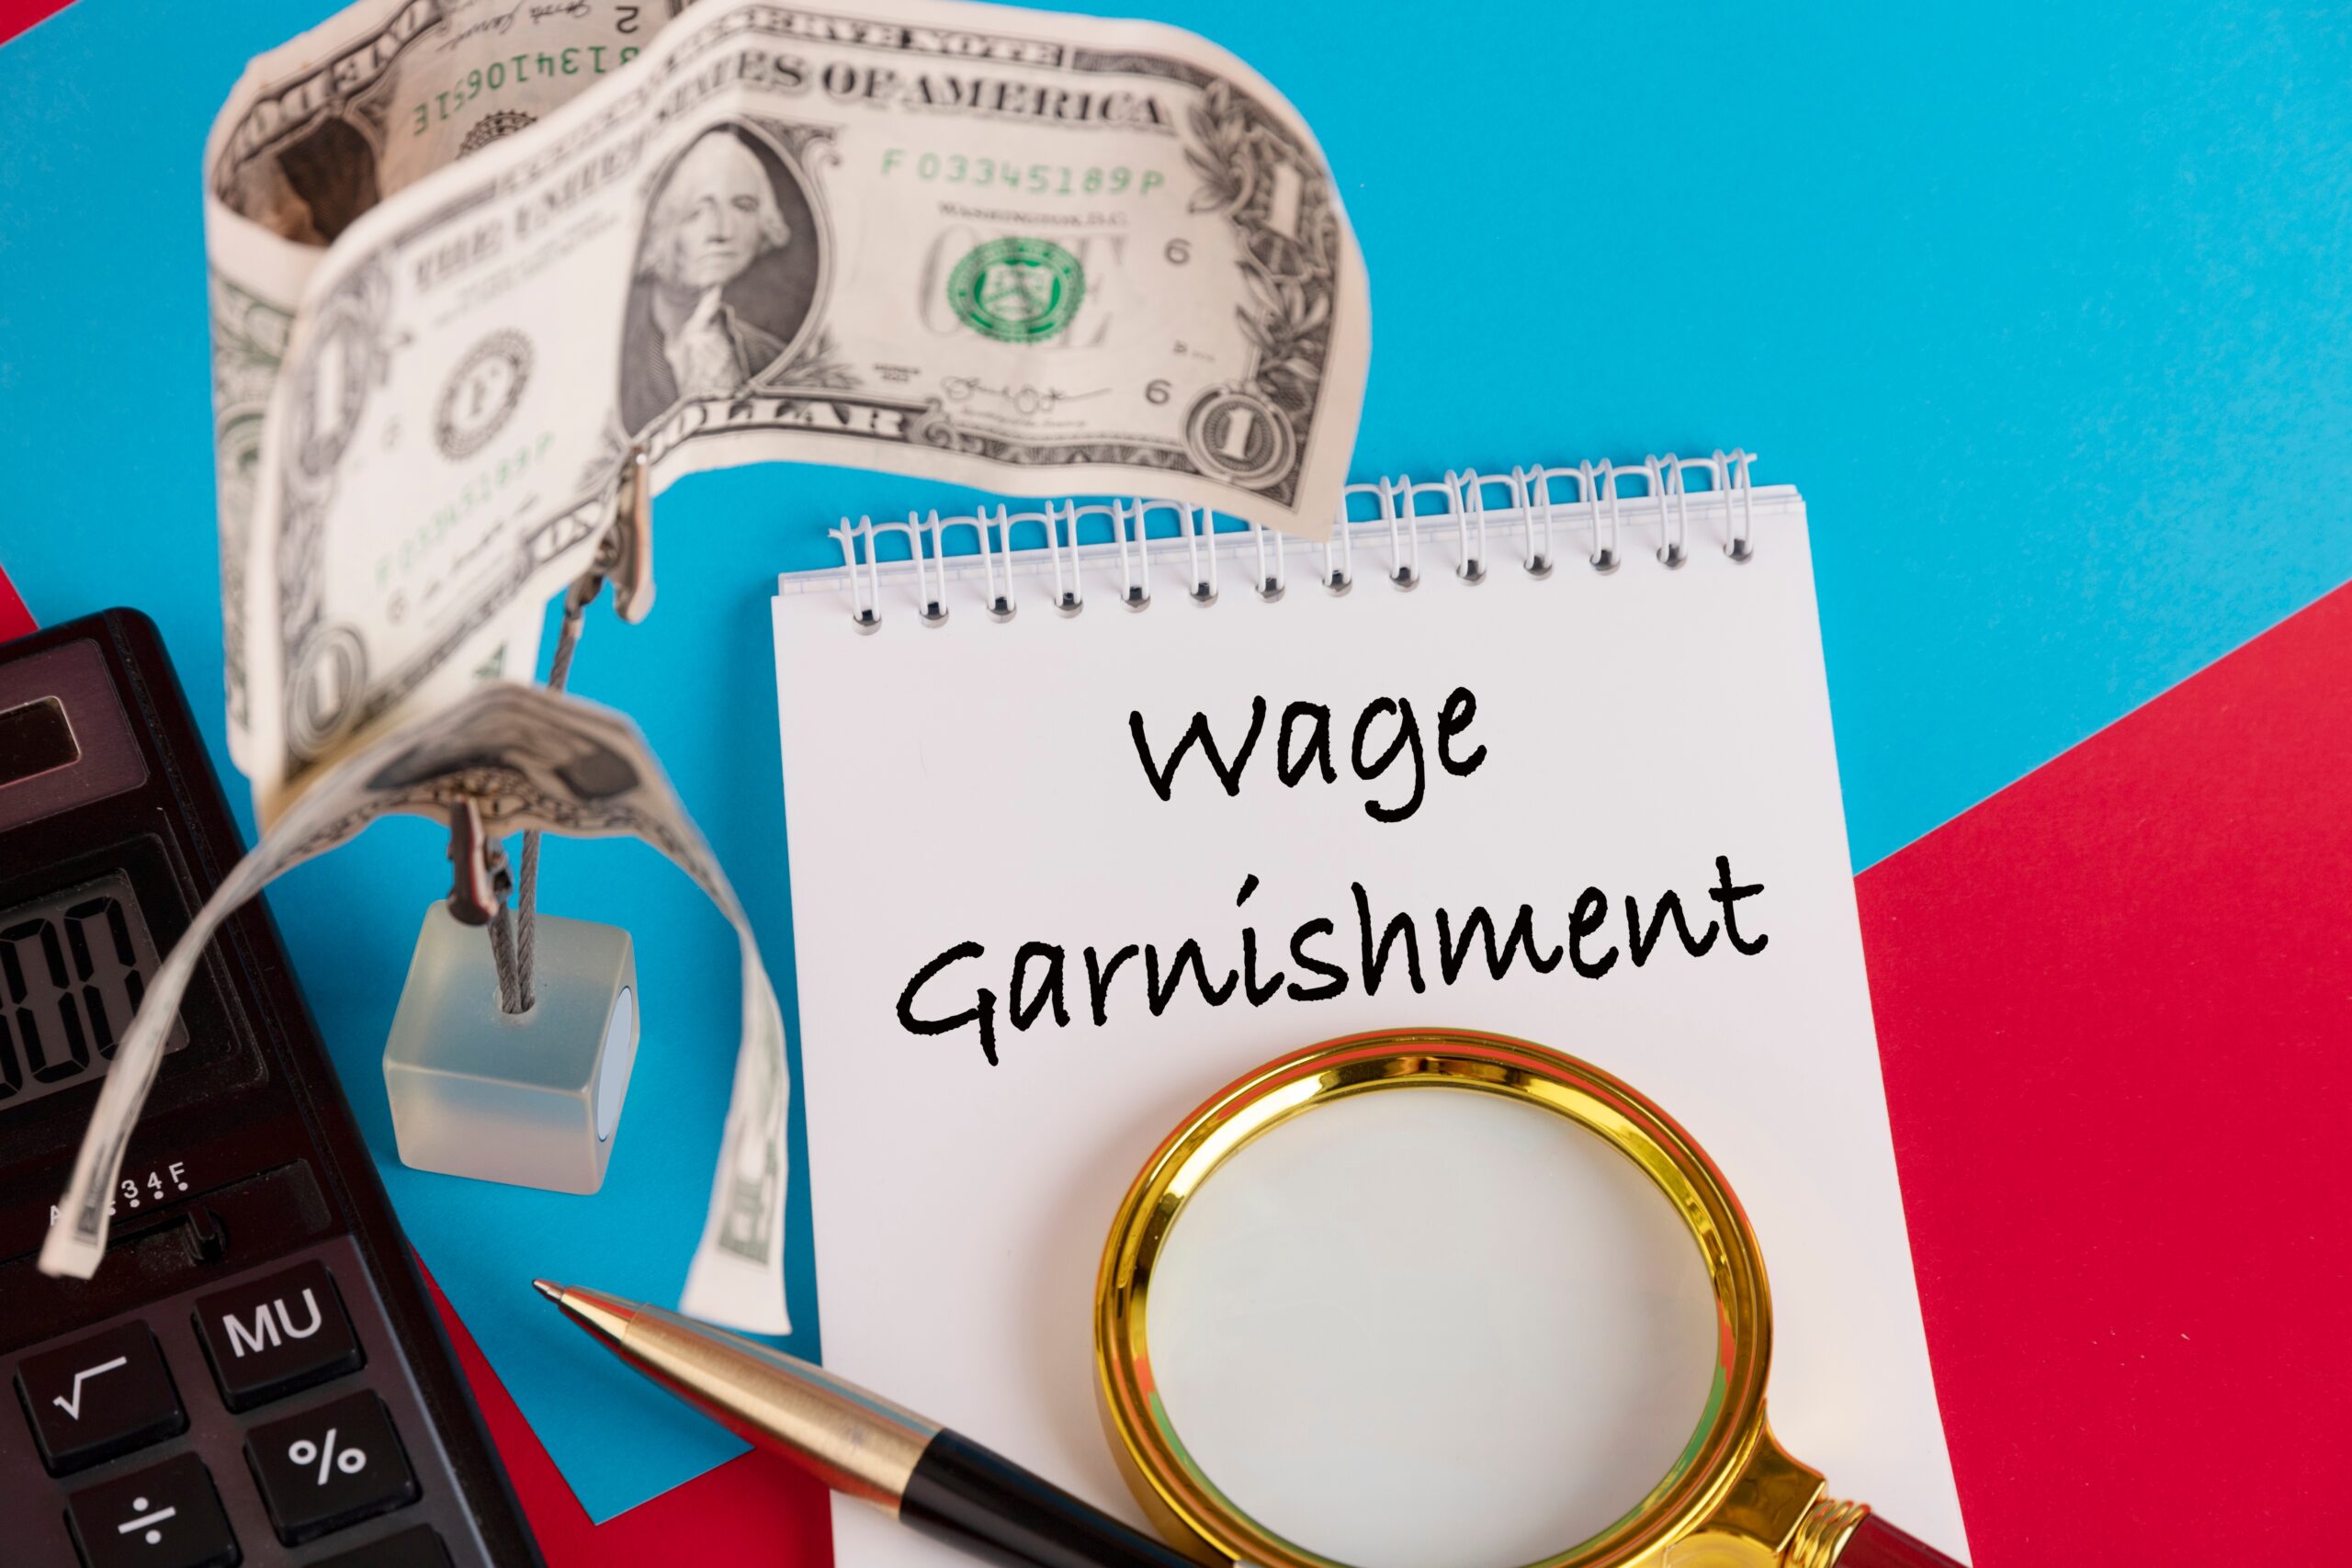 Paper with Wage Garnishment on a table